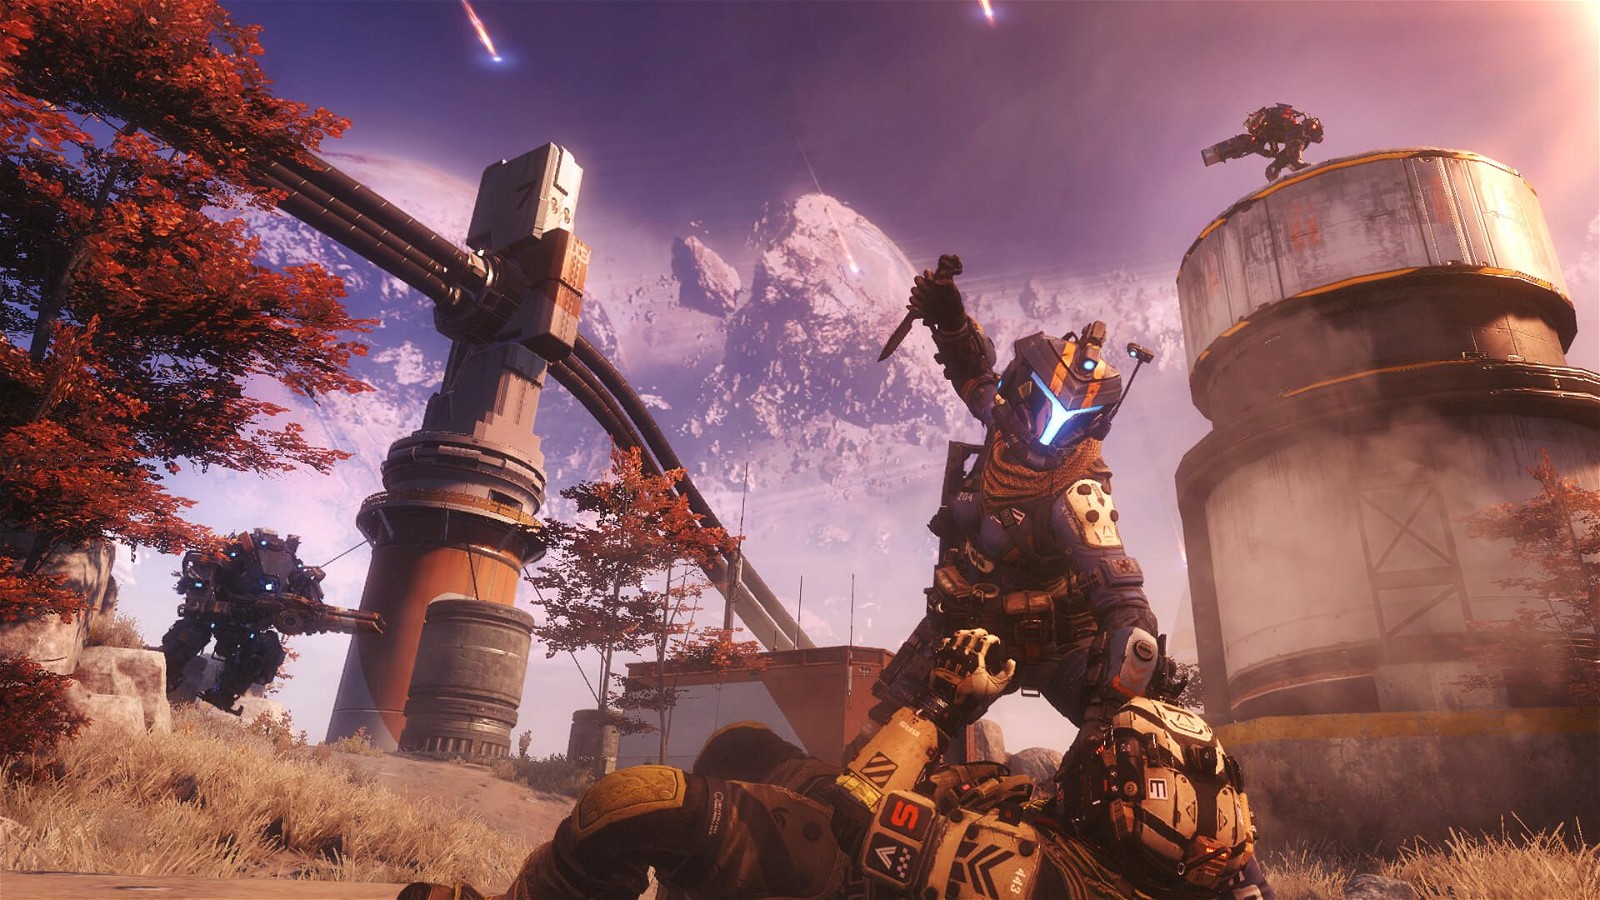 Titanfall 2 fans are excited to speculate about the future of the franchise, with the possibility of a new game or expansion on the horizon.